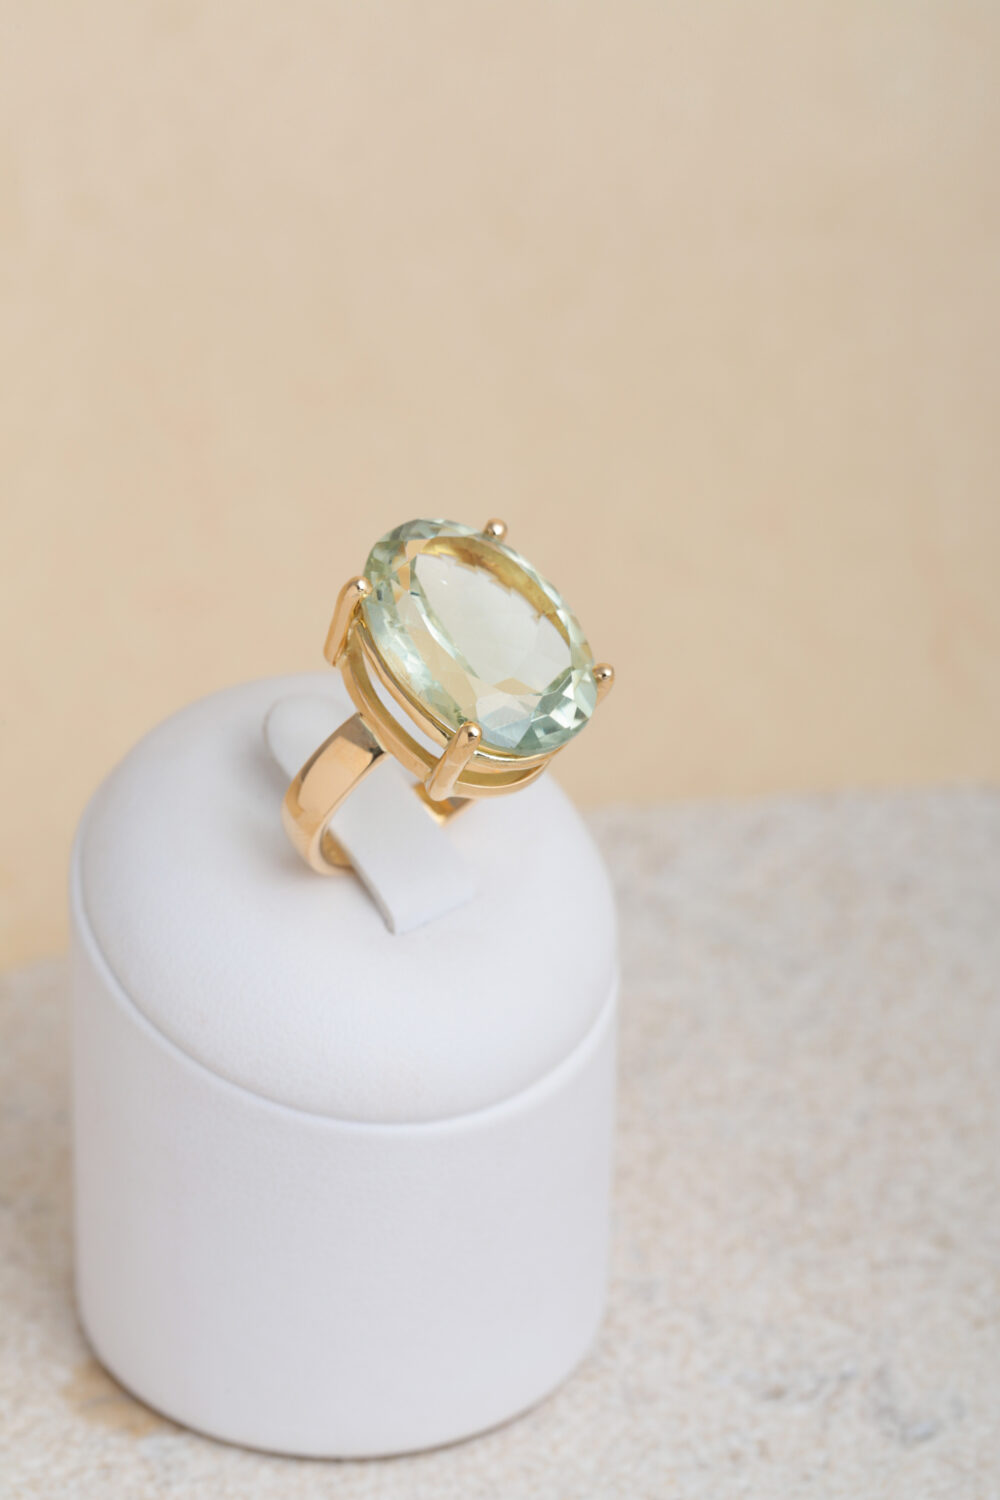 18-karat yellow gold ring set with a prasiolite gemstone. All our jewellery is handmade by jewellery designer Pascale Masselis in our Antwerp based atelier.